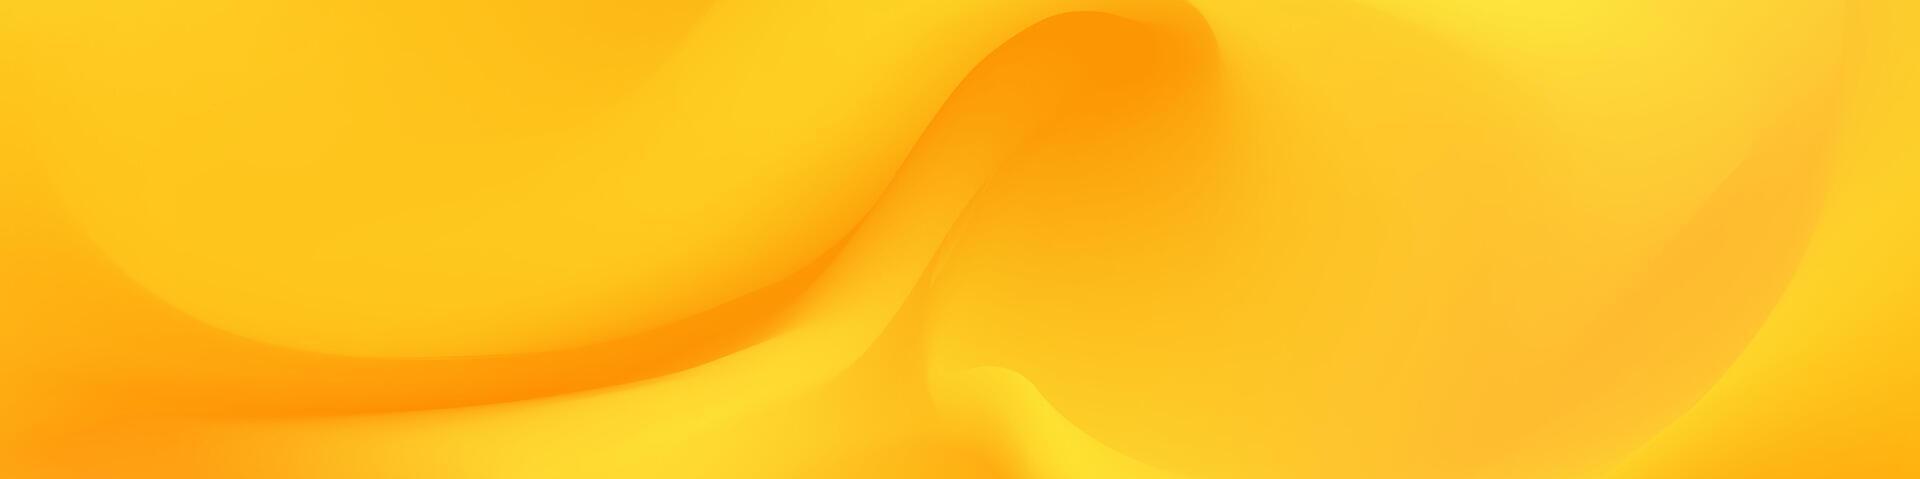 Abstract Background yellow color with Blurred Image is a  visually appealing design asset for use in advertisements, websites, or social media posts to add a modern touch to the visuals. vector